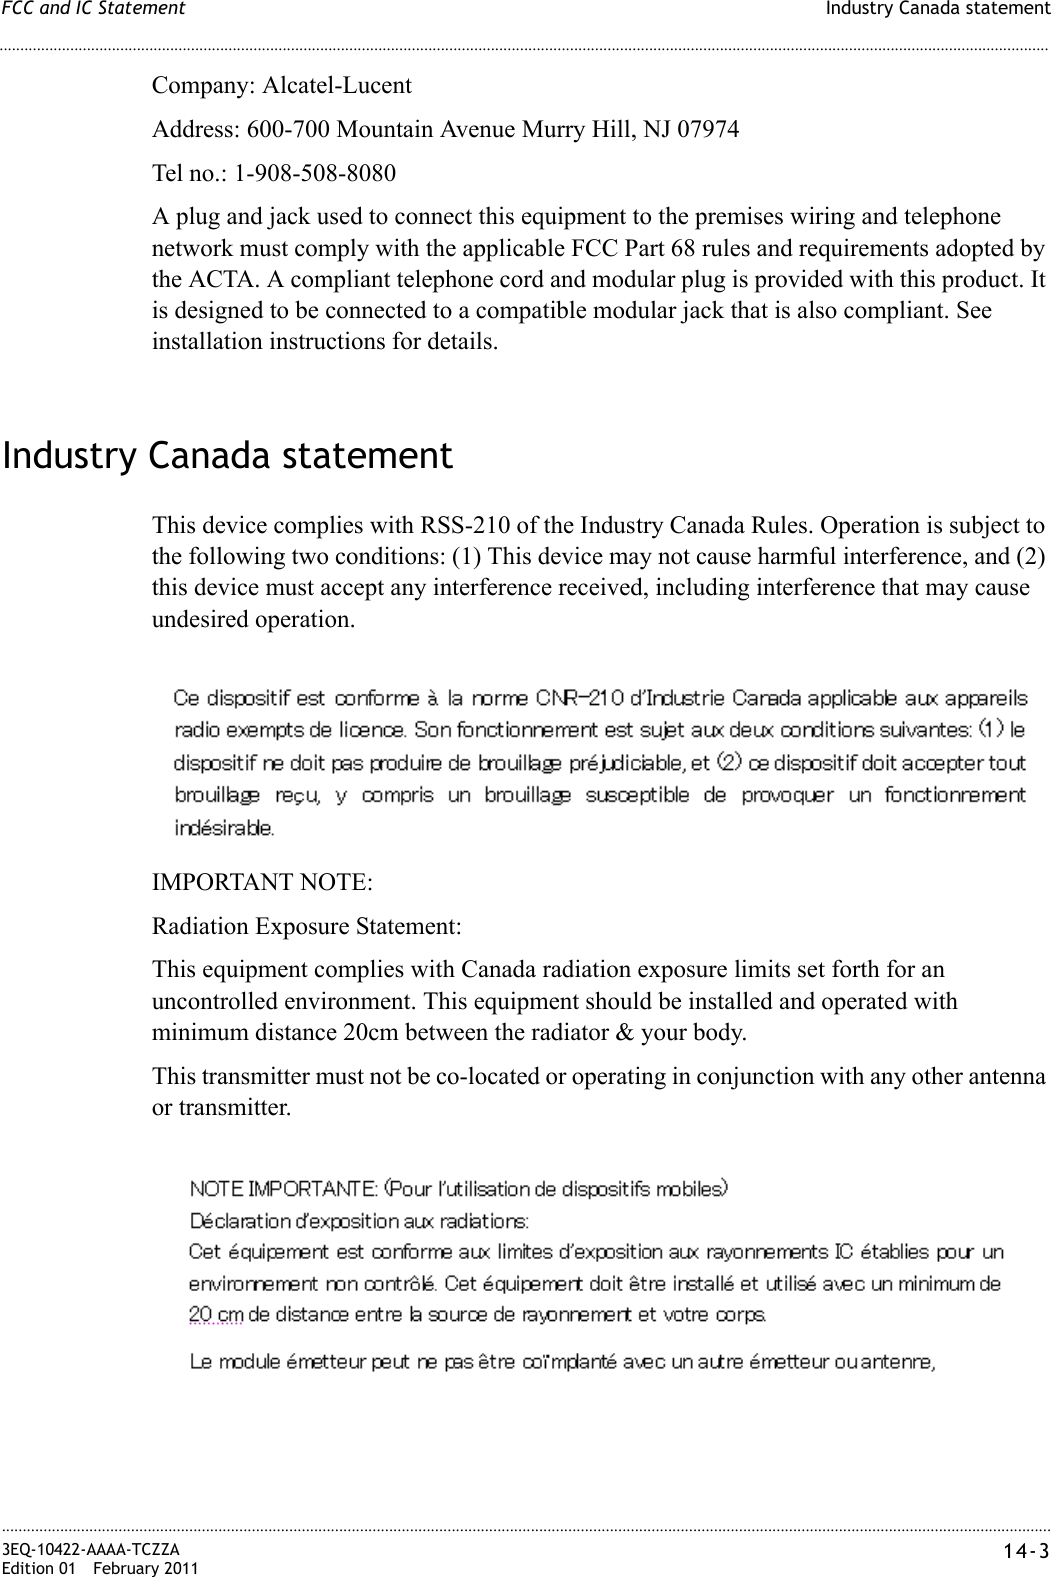 Industry Canada statementFCC and IC Statement............................................................................................................................................................................................................................................................3EQ-10422-AAAA-TCZZAEdition 01 February 2011 14-3............................................................................................................................................................................................................................................................Company: Alcatel-LucentAddress: 600-700 Mountain Avenue Murry Hill, NJ 07974Tel no.: 1-908-508-8080A plug and jack used to connect this equipment to the premises wiring and telephone network must comply with the applicable FCC Part 68 rules and requirements adopted by the ACTA. A compliant telephone cord and modular plug is provided with this product. It is designed to be connected to a compatible modular jack that is also compliant. See installation instructions for details.Industry Canada statementThis device complies with RSS-210 of the Industry Canada Rules. Operation is subject to the following two conditions: (1) This device may not cause harmful interference, and (2) this device must accept any interference received, including interference that may cause undesired operation.IMPORTANT NOTE:Radiation Exposure Statement:This equipment complies with Canada radiation exposure limits set forth for an uncontrolled environment. This equipment should be installed and operated with minimum distance 20cm between the radiator &amp; your body.This transmitter must not be co-located or operating in conjunction with any other antenna or transmitter.